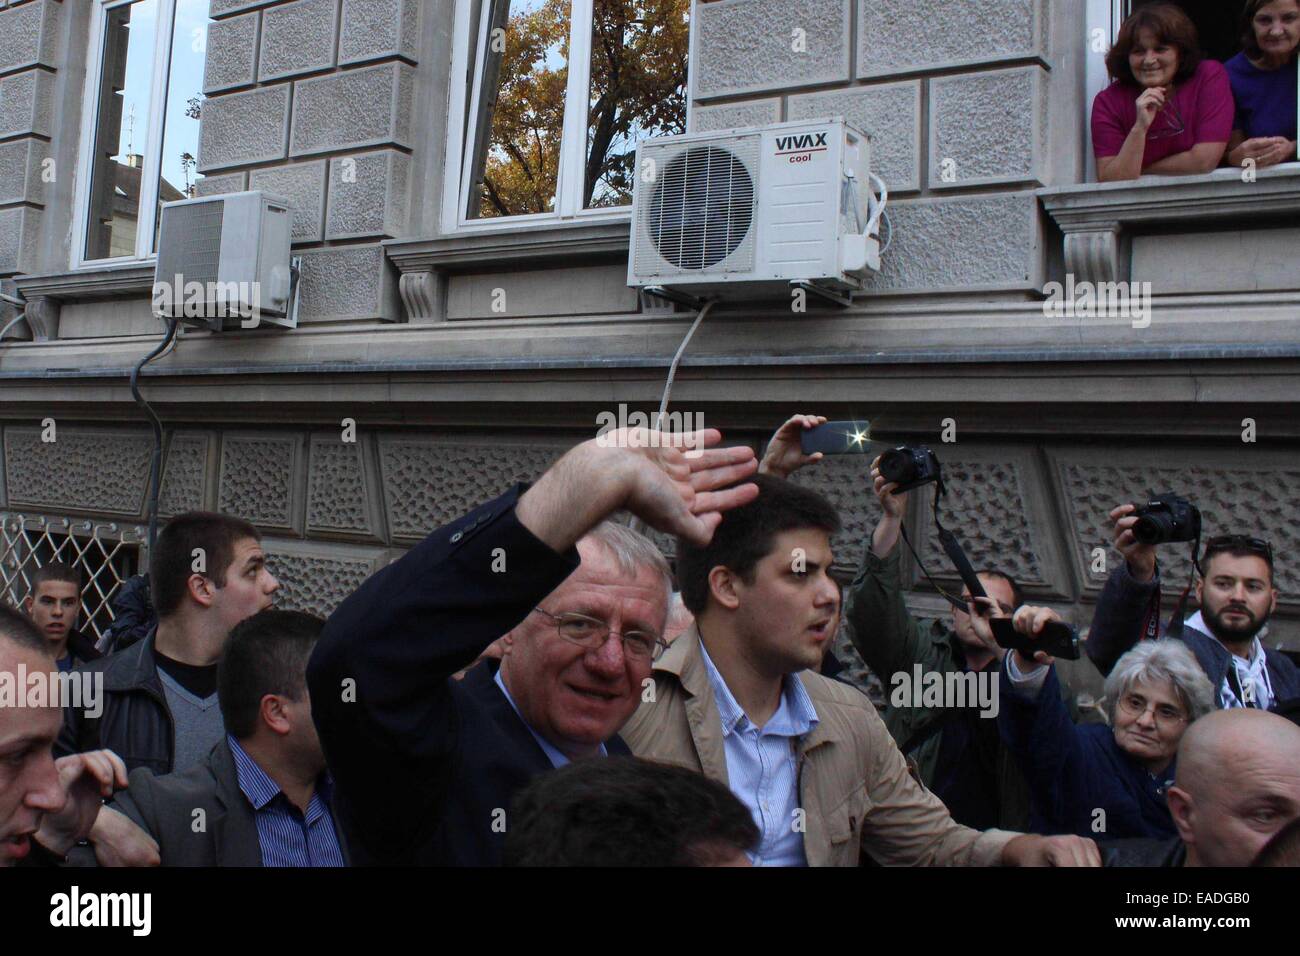 Belgrade. 12th Nov, 2014. Vojislav Seselj (C), former leader of the Serbian Radical Party, arrives at his party headquarters in Belgrade, Serbia, on Nov. 12. Vojislav Seselj who was indicted for war crimes was provisionally released due to health reasons on Wednesday. Credit:  Nemanja Cabric/Xinhua/Alamy Live News Stock Photo